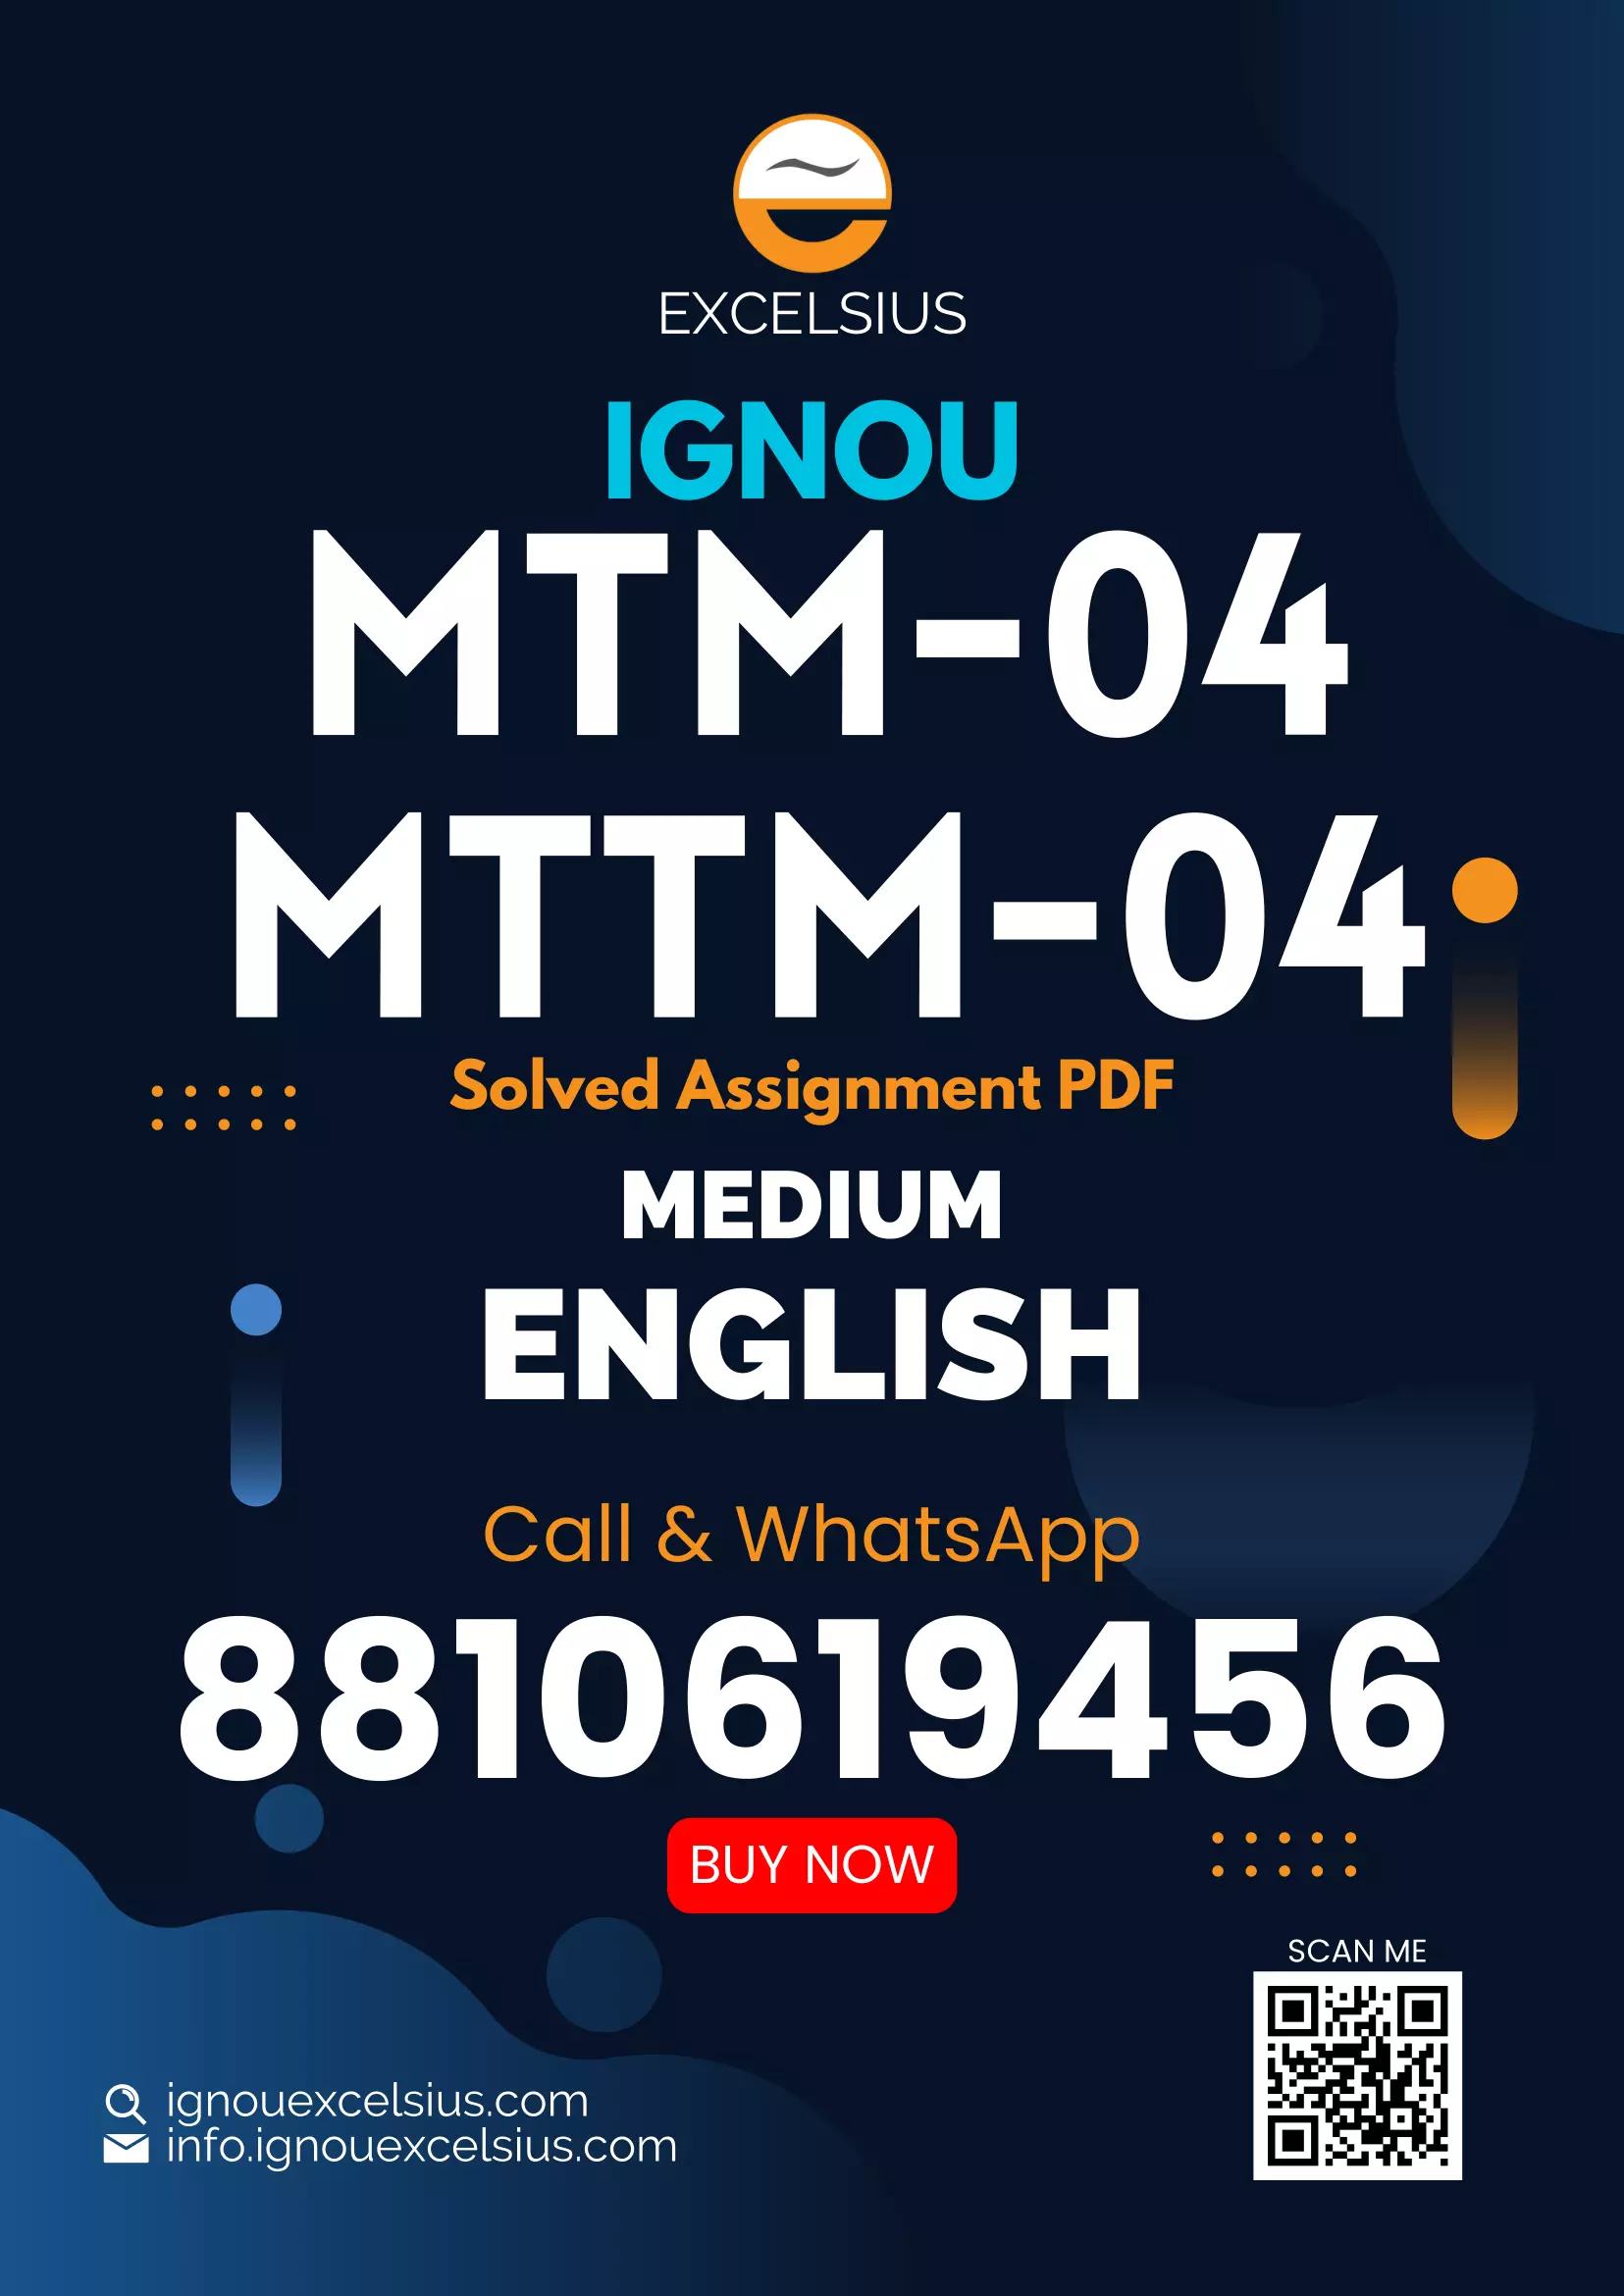 IGNOU MTM-04/MTTM-04 - Information Management Systems and Tourism, Latest Solved Assignment-January 2023 - July 2023